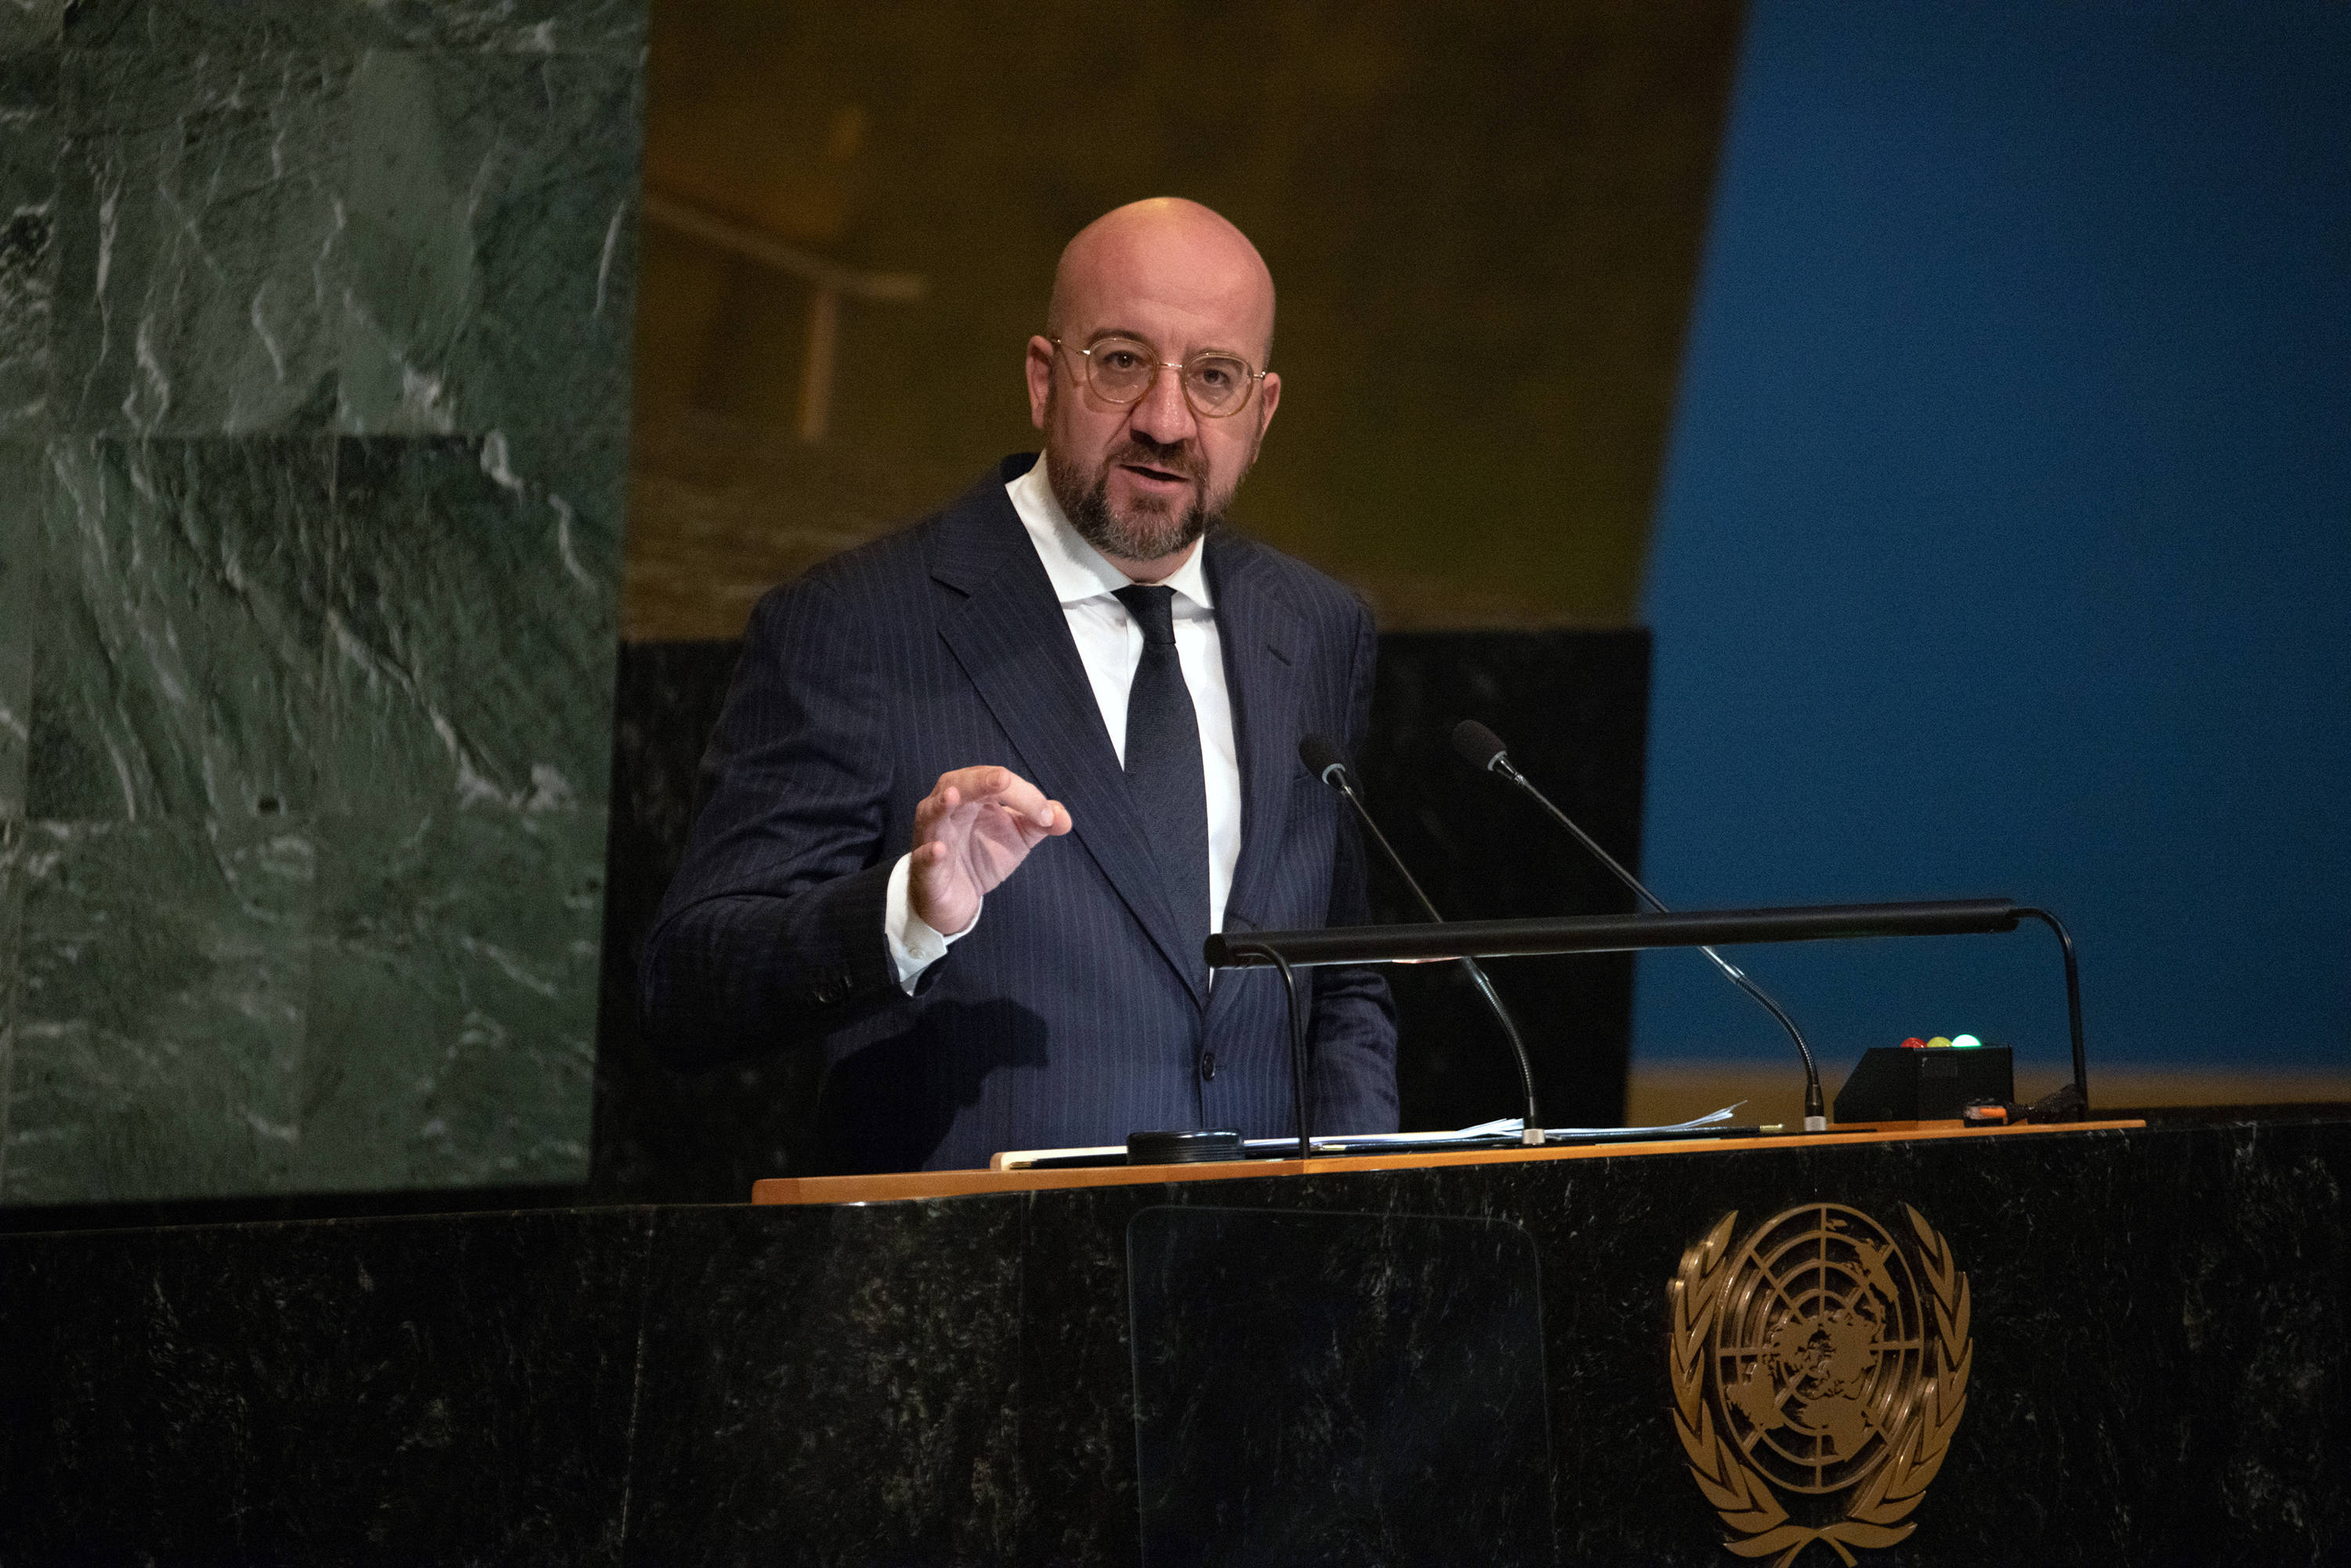 European Council President Charles Michel speaks during the United Nations General Assembly in New York, on Friday, September 23.